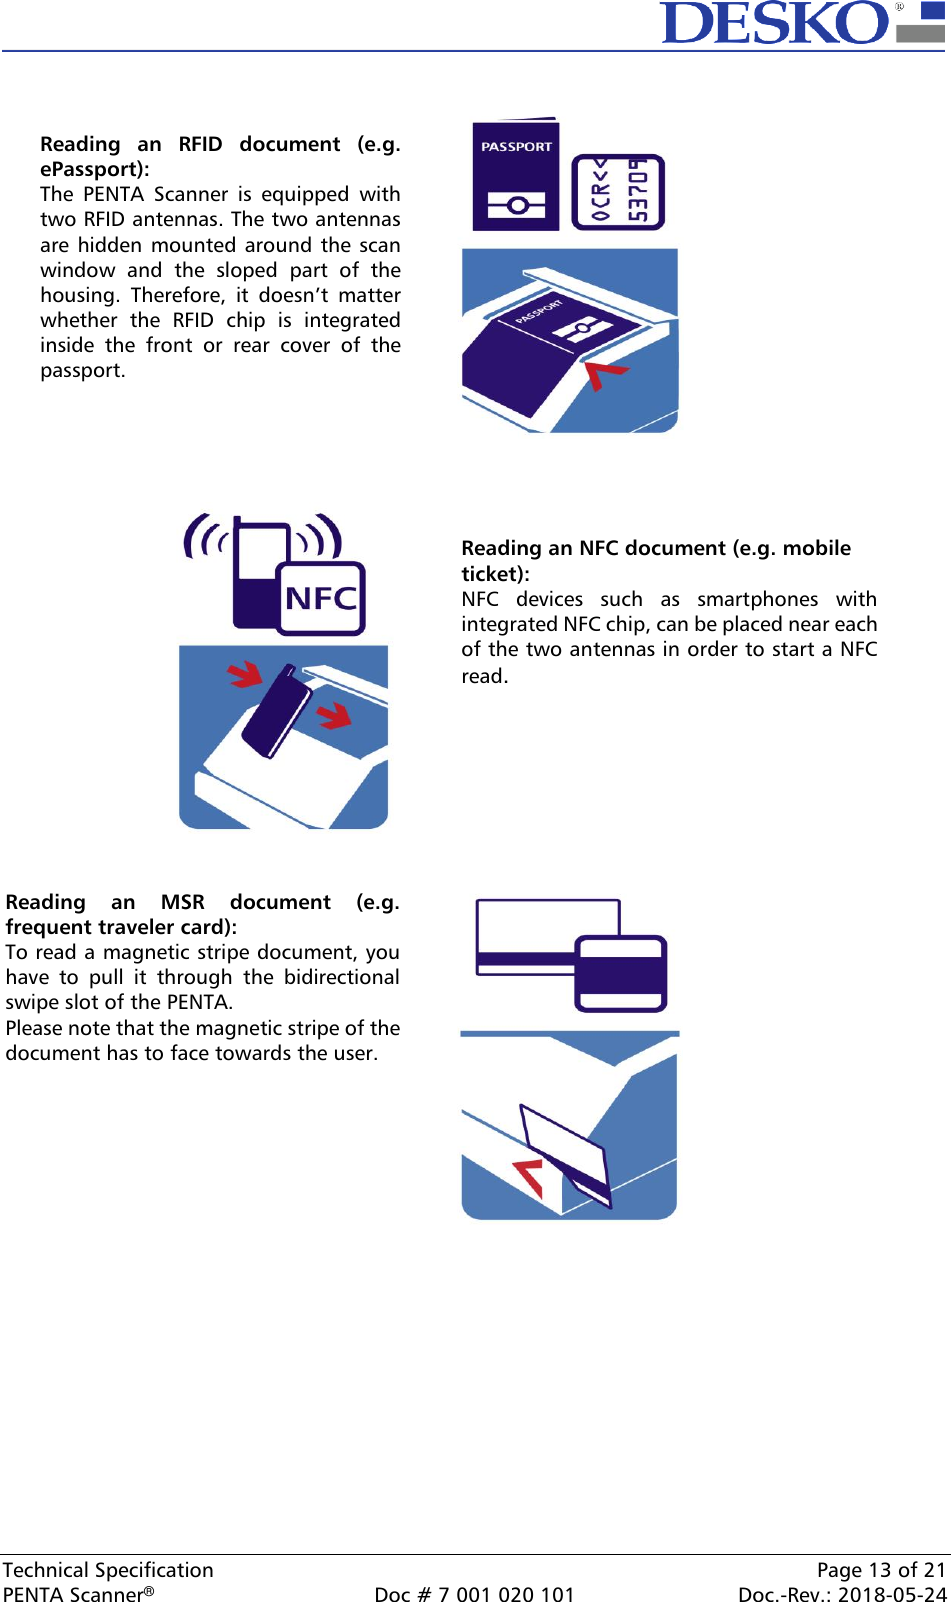  Technical Specification    Page 13 of 21 PENTA Scanner®  Doc # 7 001 020 101  Doc.-Rev.: 2018-05-24                                                         Reading  an  RFID  document  (e.g. ePassport): The  PENTA  Scanner  is  equipped  with two RFID antennas. The two antennas are hidden mounted around the scan window  and  the  sloped  part  of  the housing.  Therefore,  it  doesn’t  matter whether  the  RFID  chip  is  integrated inside  the  front  or  rear  cover  of  the passport.  Reading  an  MSR  document  (e.g. frequent traveler card): To read a magnetic stripe document, you have  to  pull  it  through  the  bidirectional swipe slot of the PENTA.  Please note that the magnetic stripe of the document has to face towards the user. Reading an NFC document (e.g. mobile ticket): NFC  devices  such  as  smartphones  with integrated NFC chip, can be placed near each of the two antennas in order to start a NFC read.  